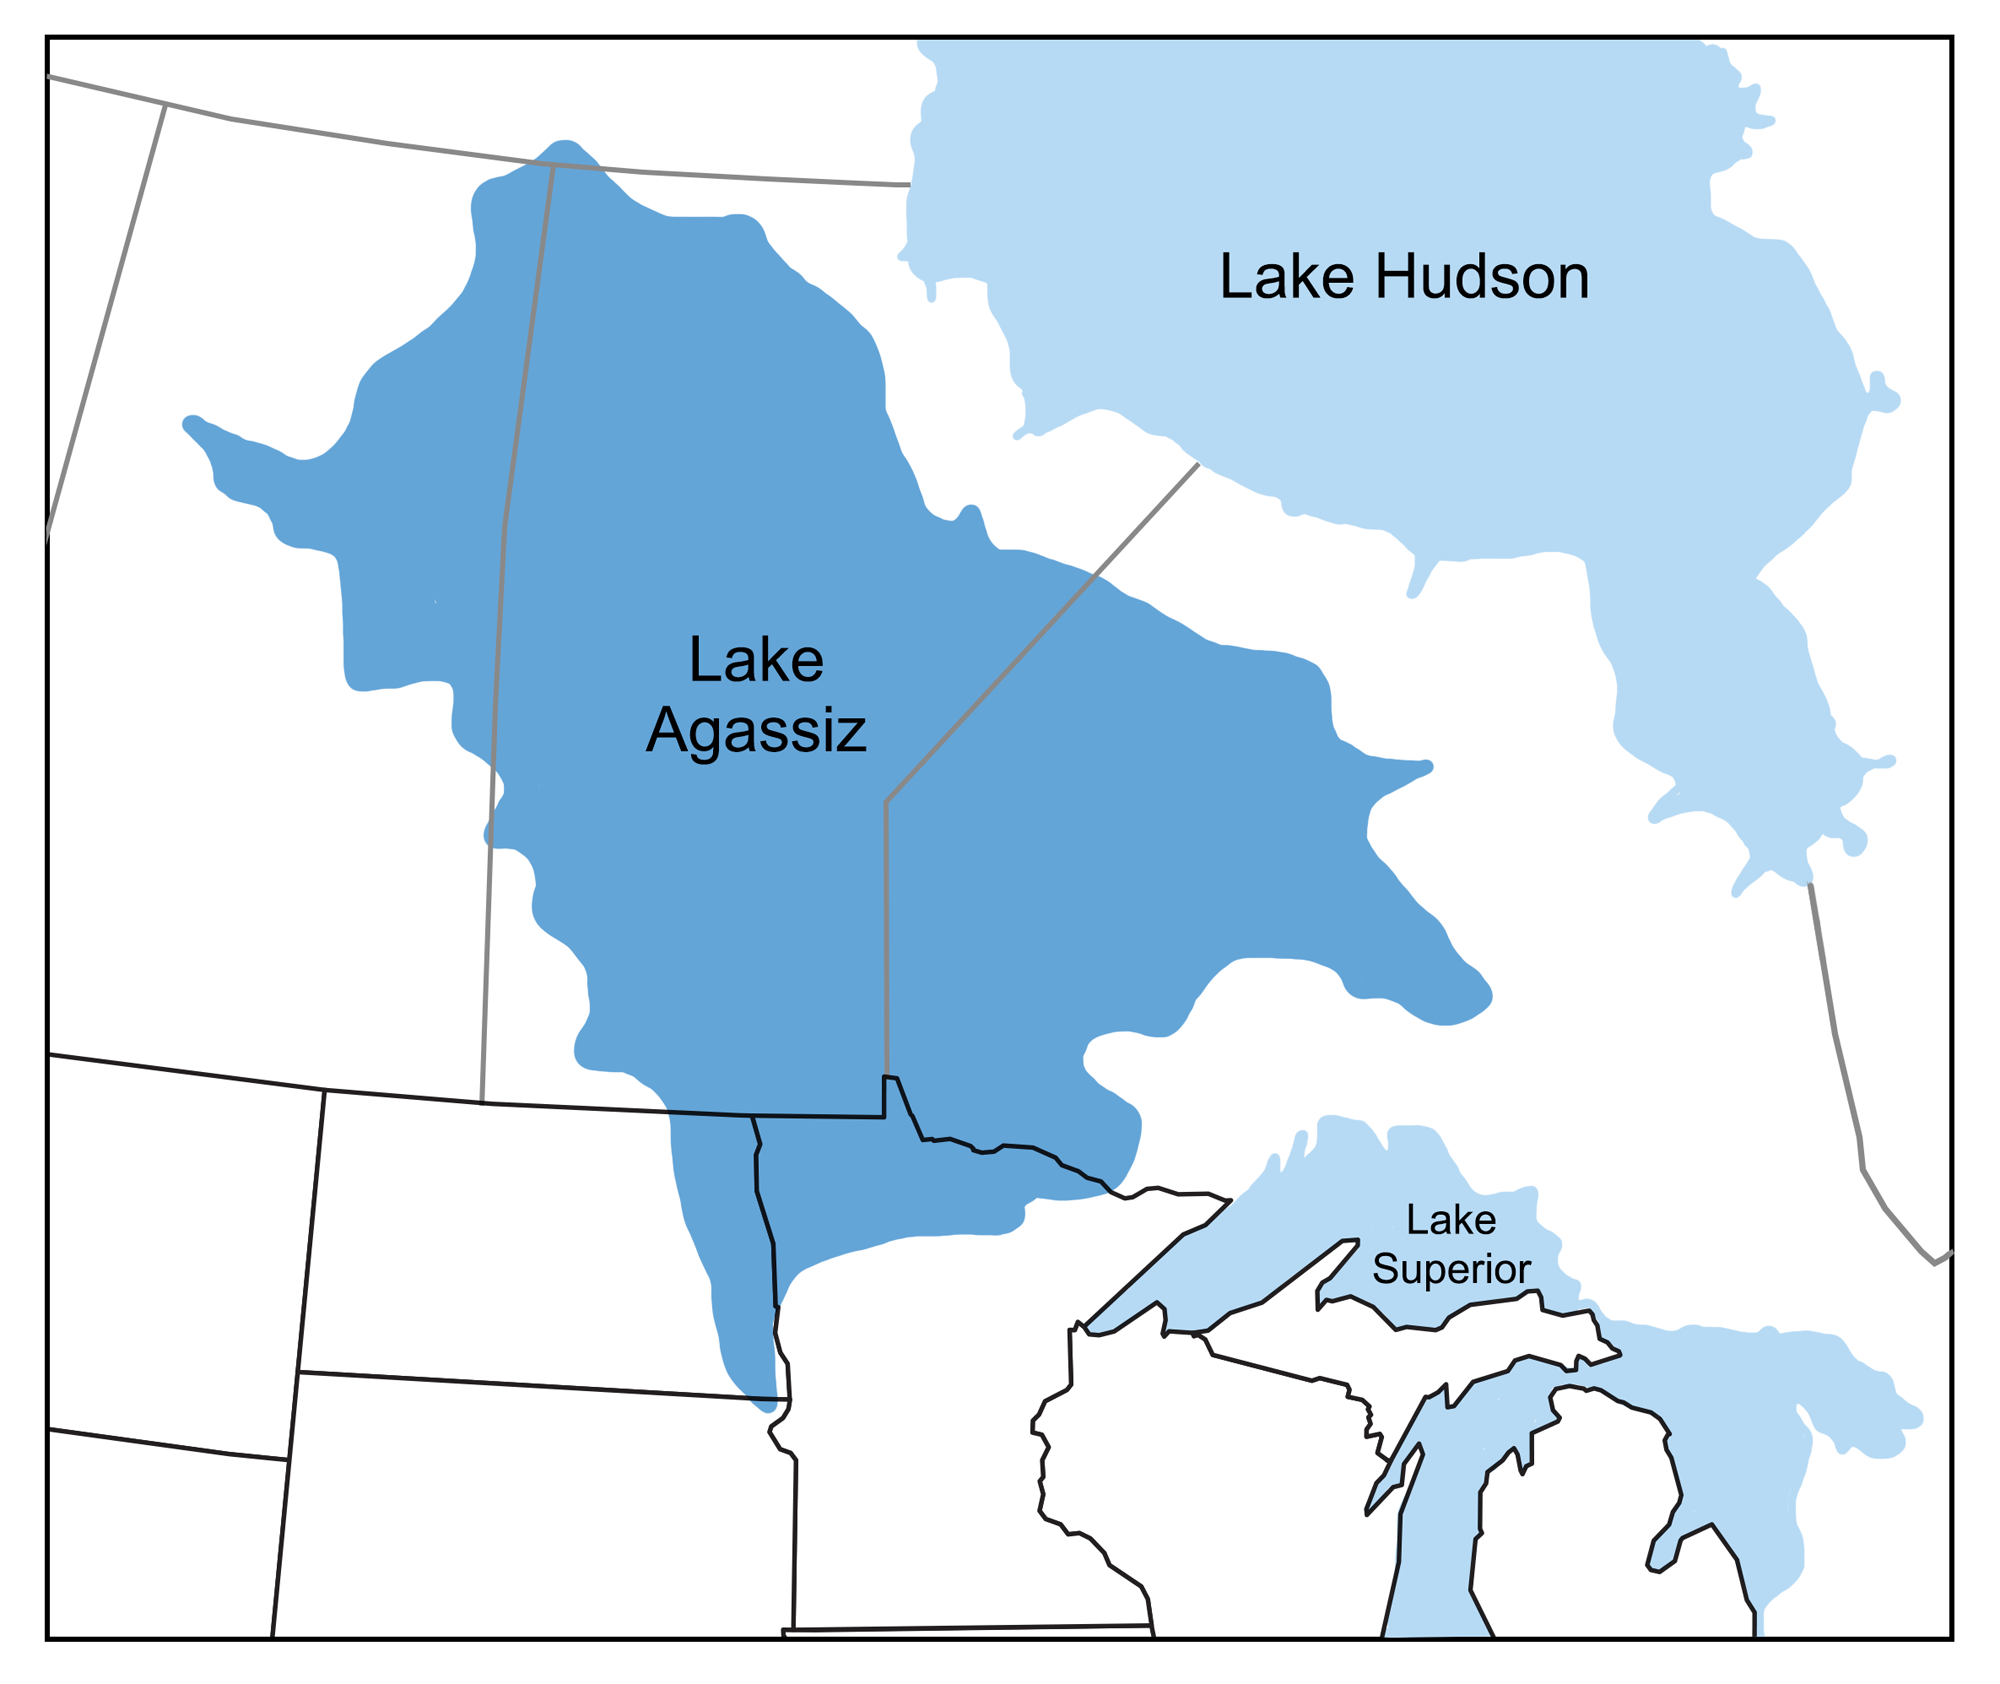 Map of glacial Lake Agassiz, showing its extent. The lake covers 